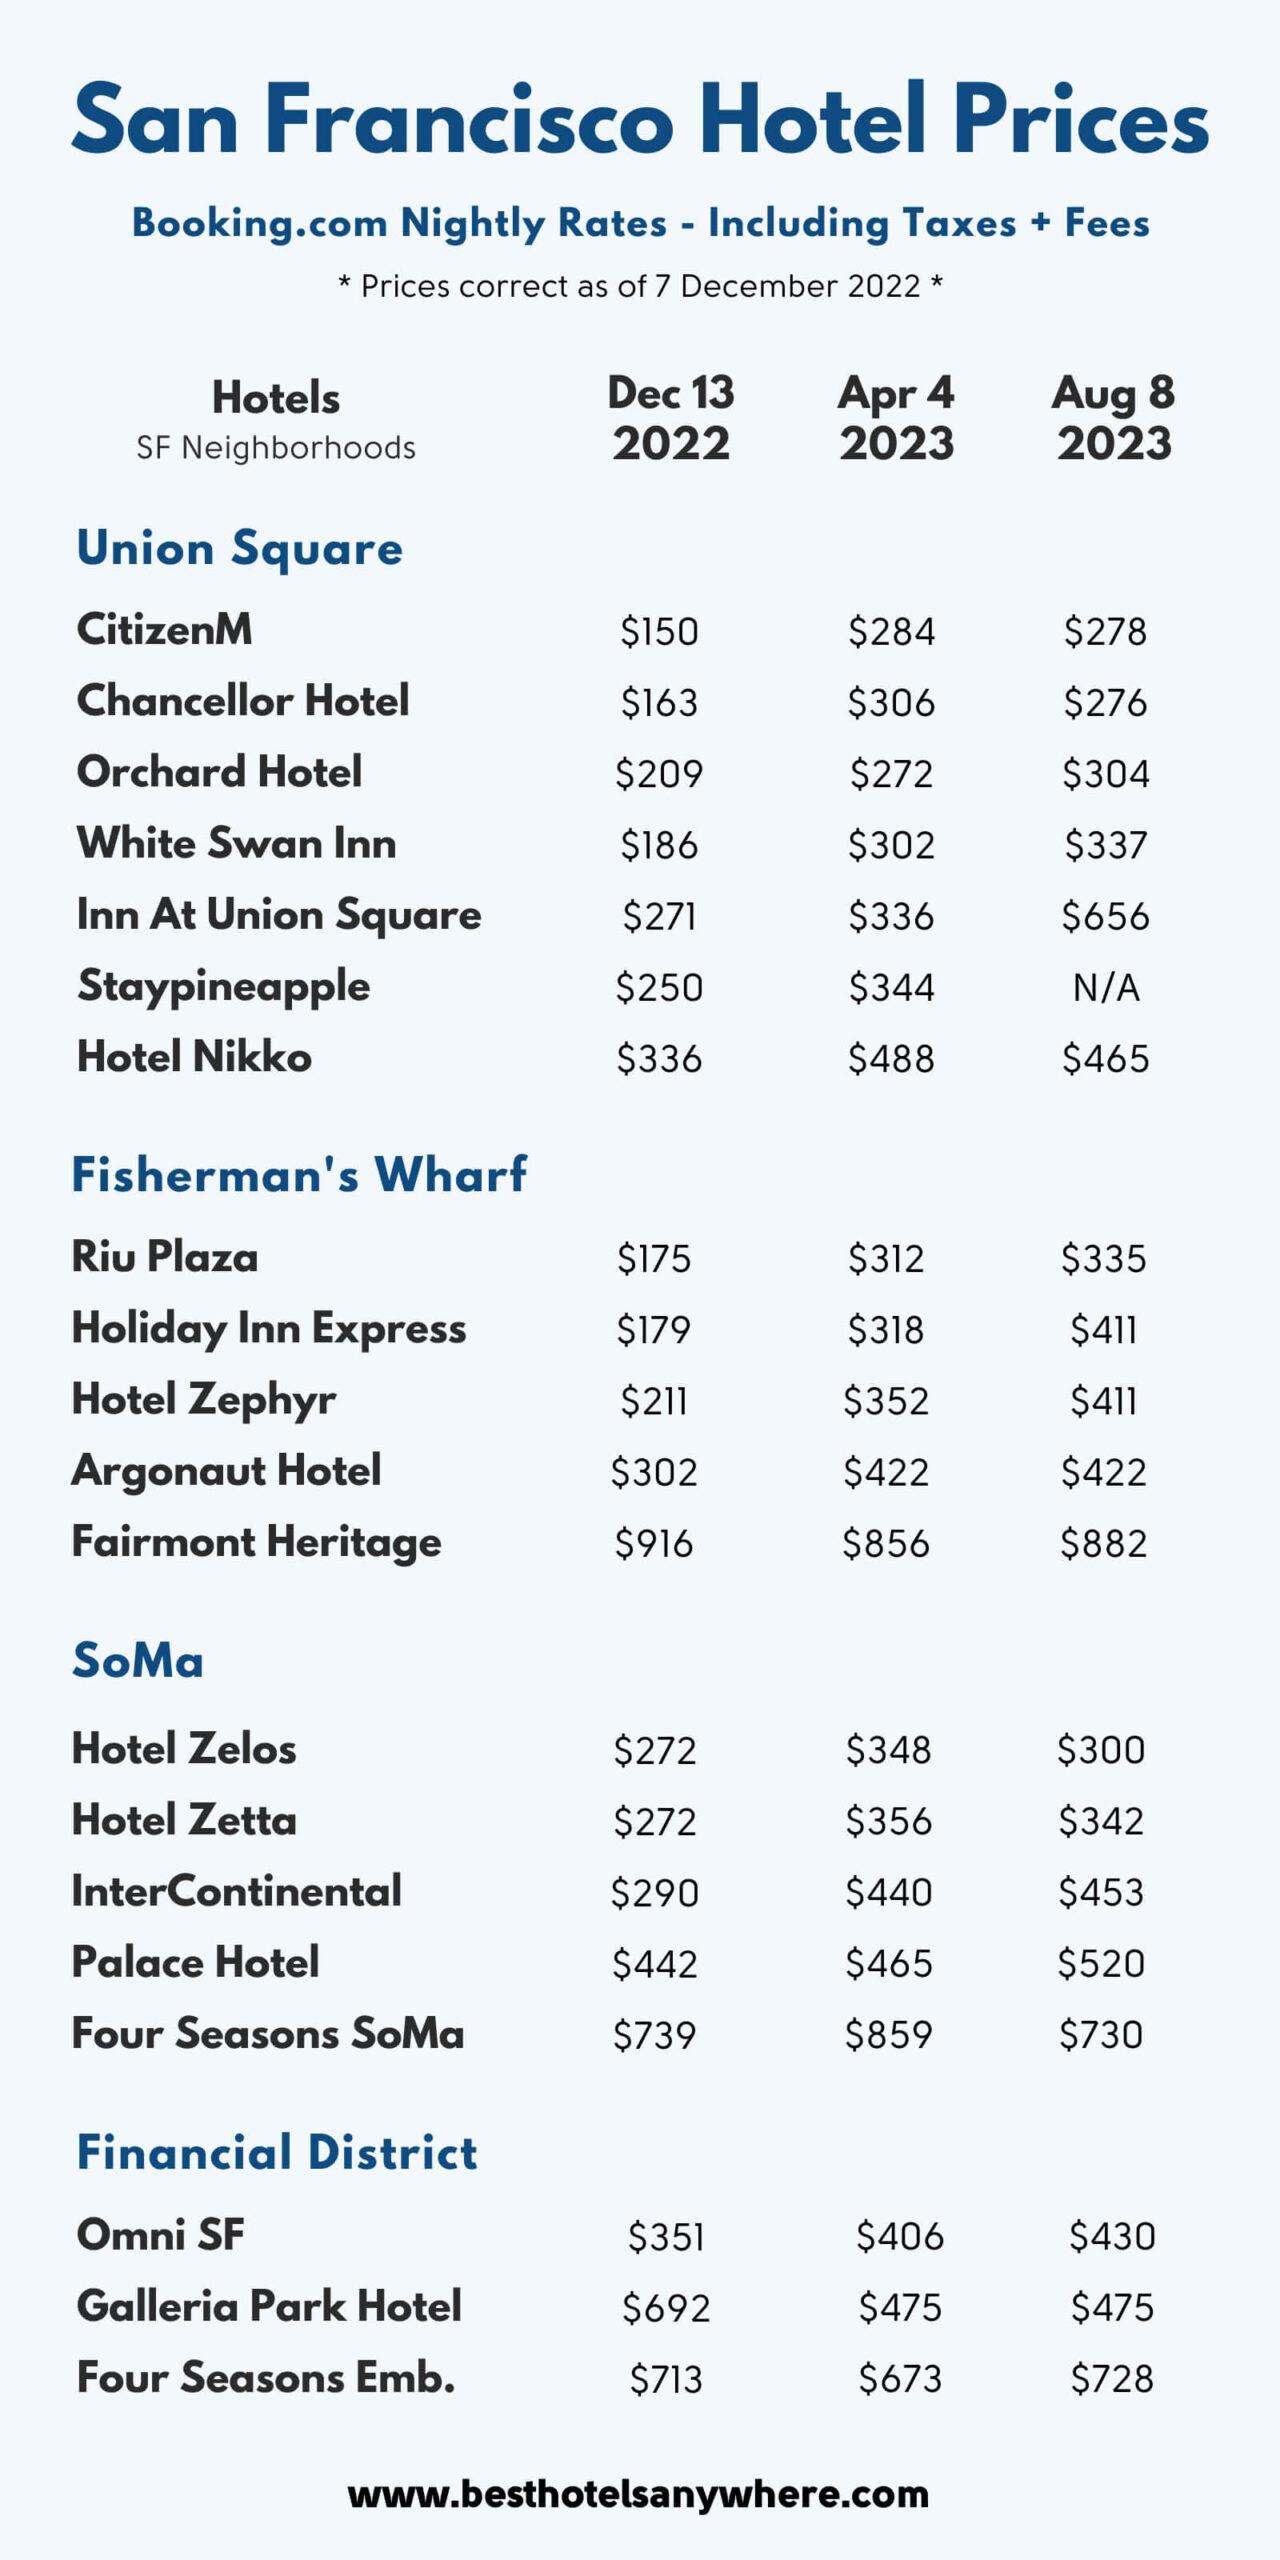 San Francisco hotel prices for 20 hotels throughout the popular neighborhoods in December 2022 April 2023 and August 2023 infographic by Best Hotels Anywhere